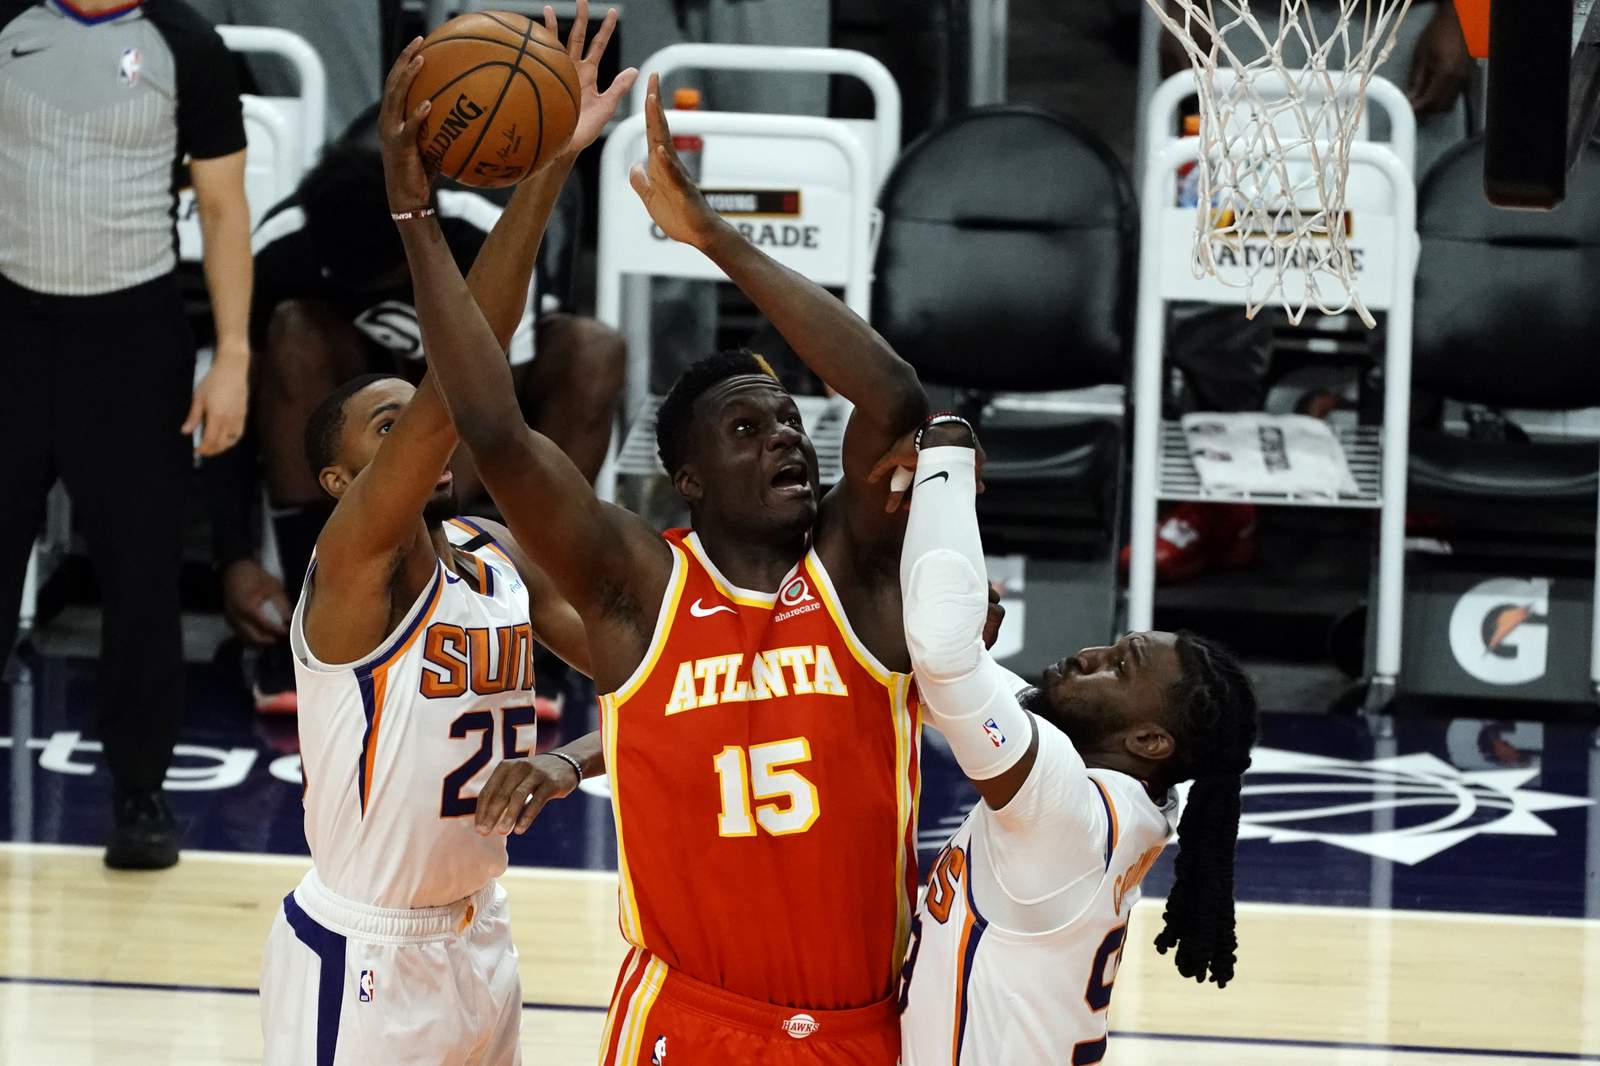 Suns turn away late Hawks rally for a 117-110 victory